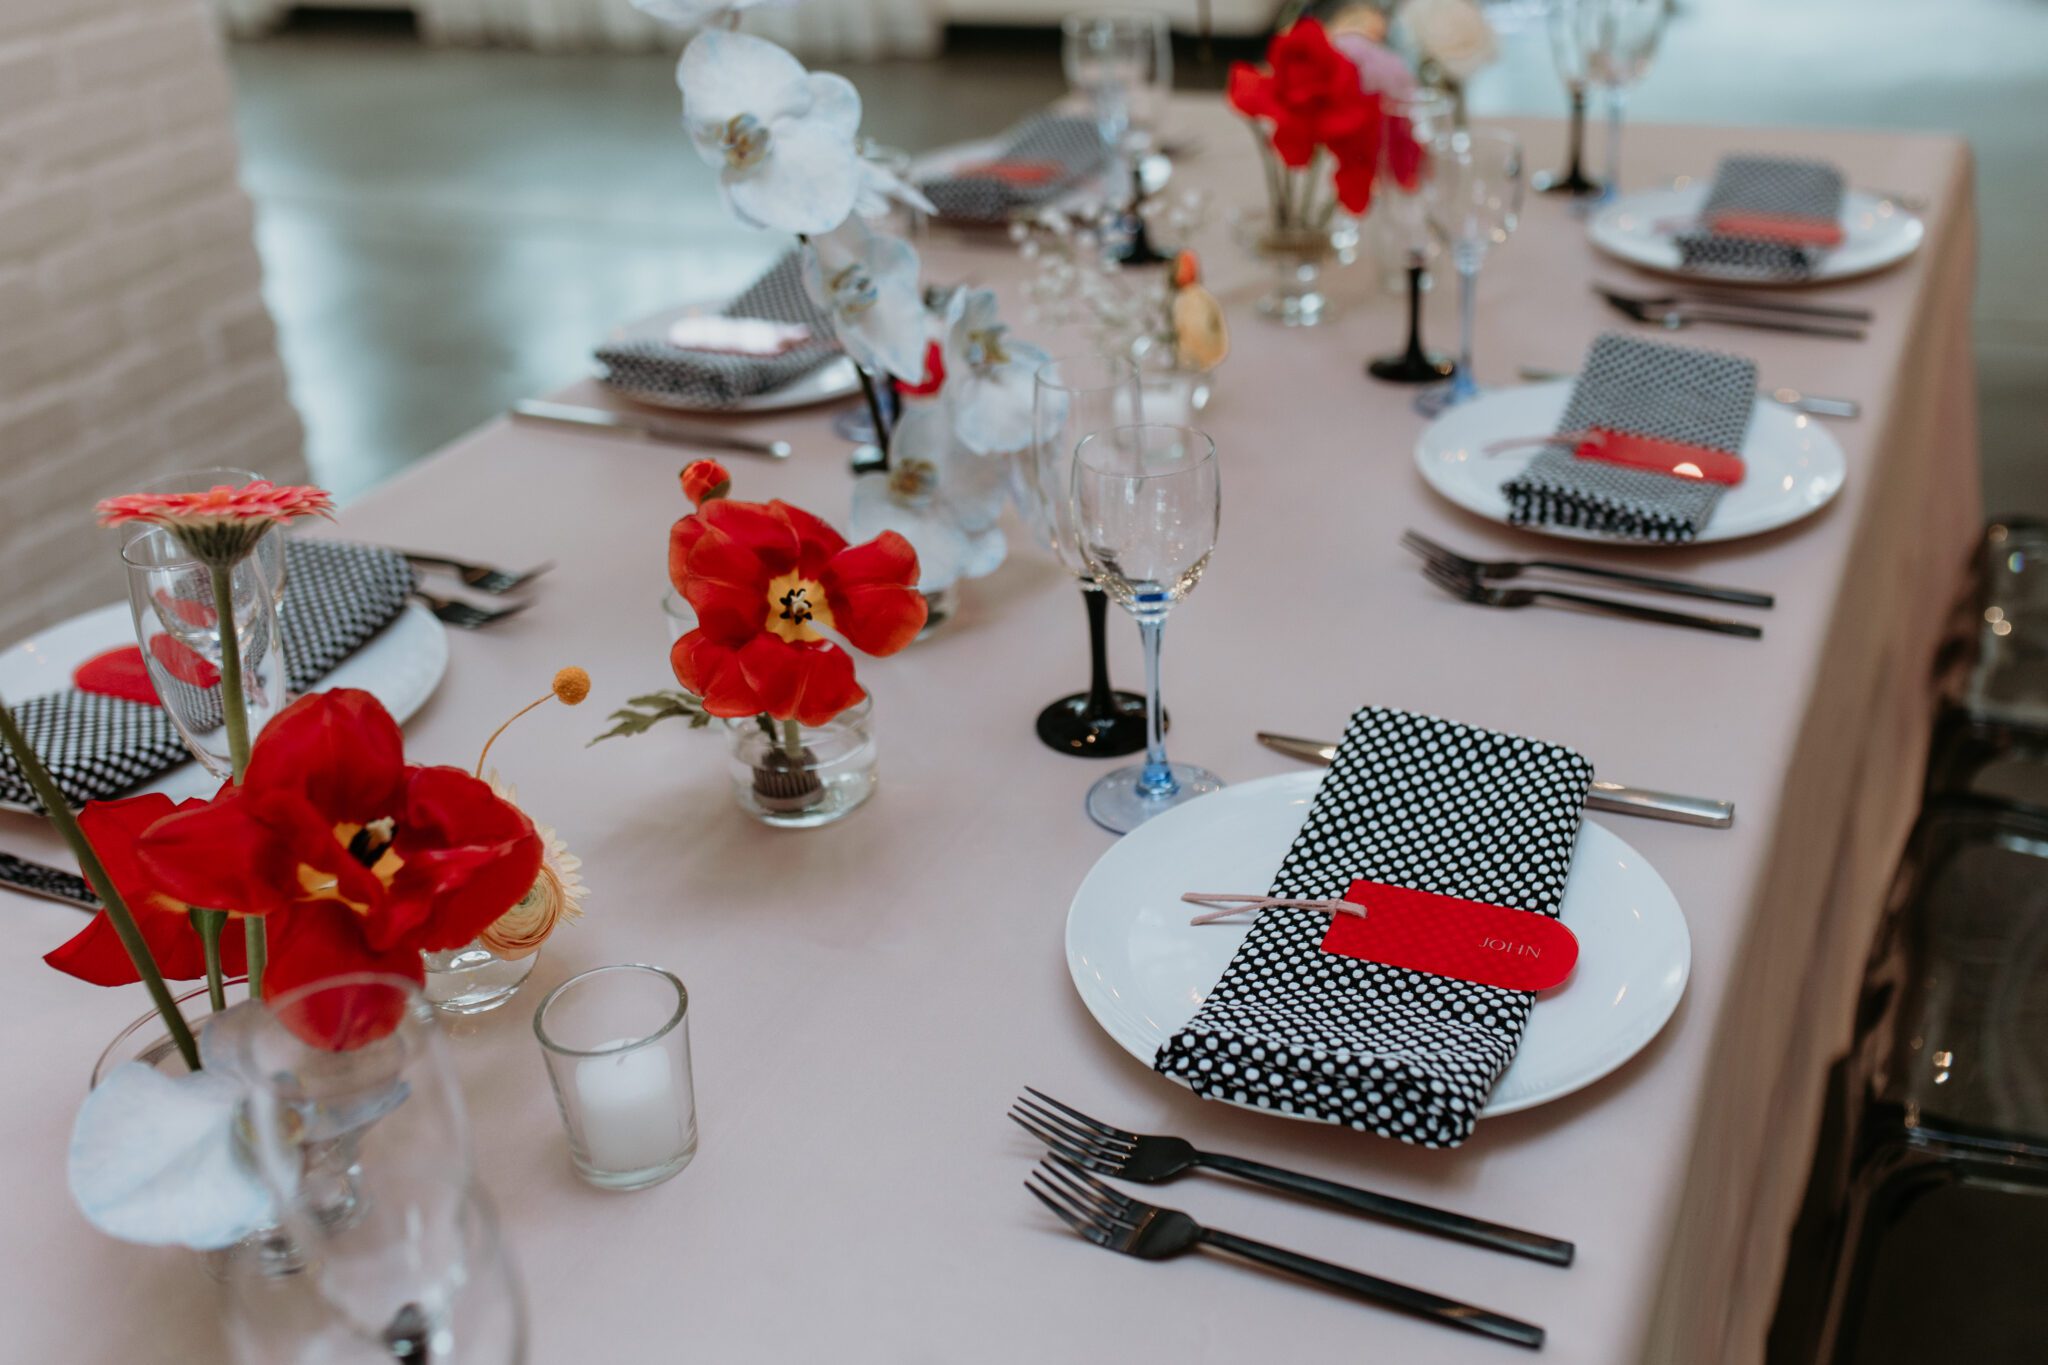 A contemporary wedding tablescape blending modern and retro elements: light pink tablecloth, grey ghost chairs, black acrylic place cards, patterned napkins, retro-inspired table numbers, and ikebana floral arrangements with anthurium flowers.